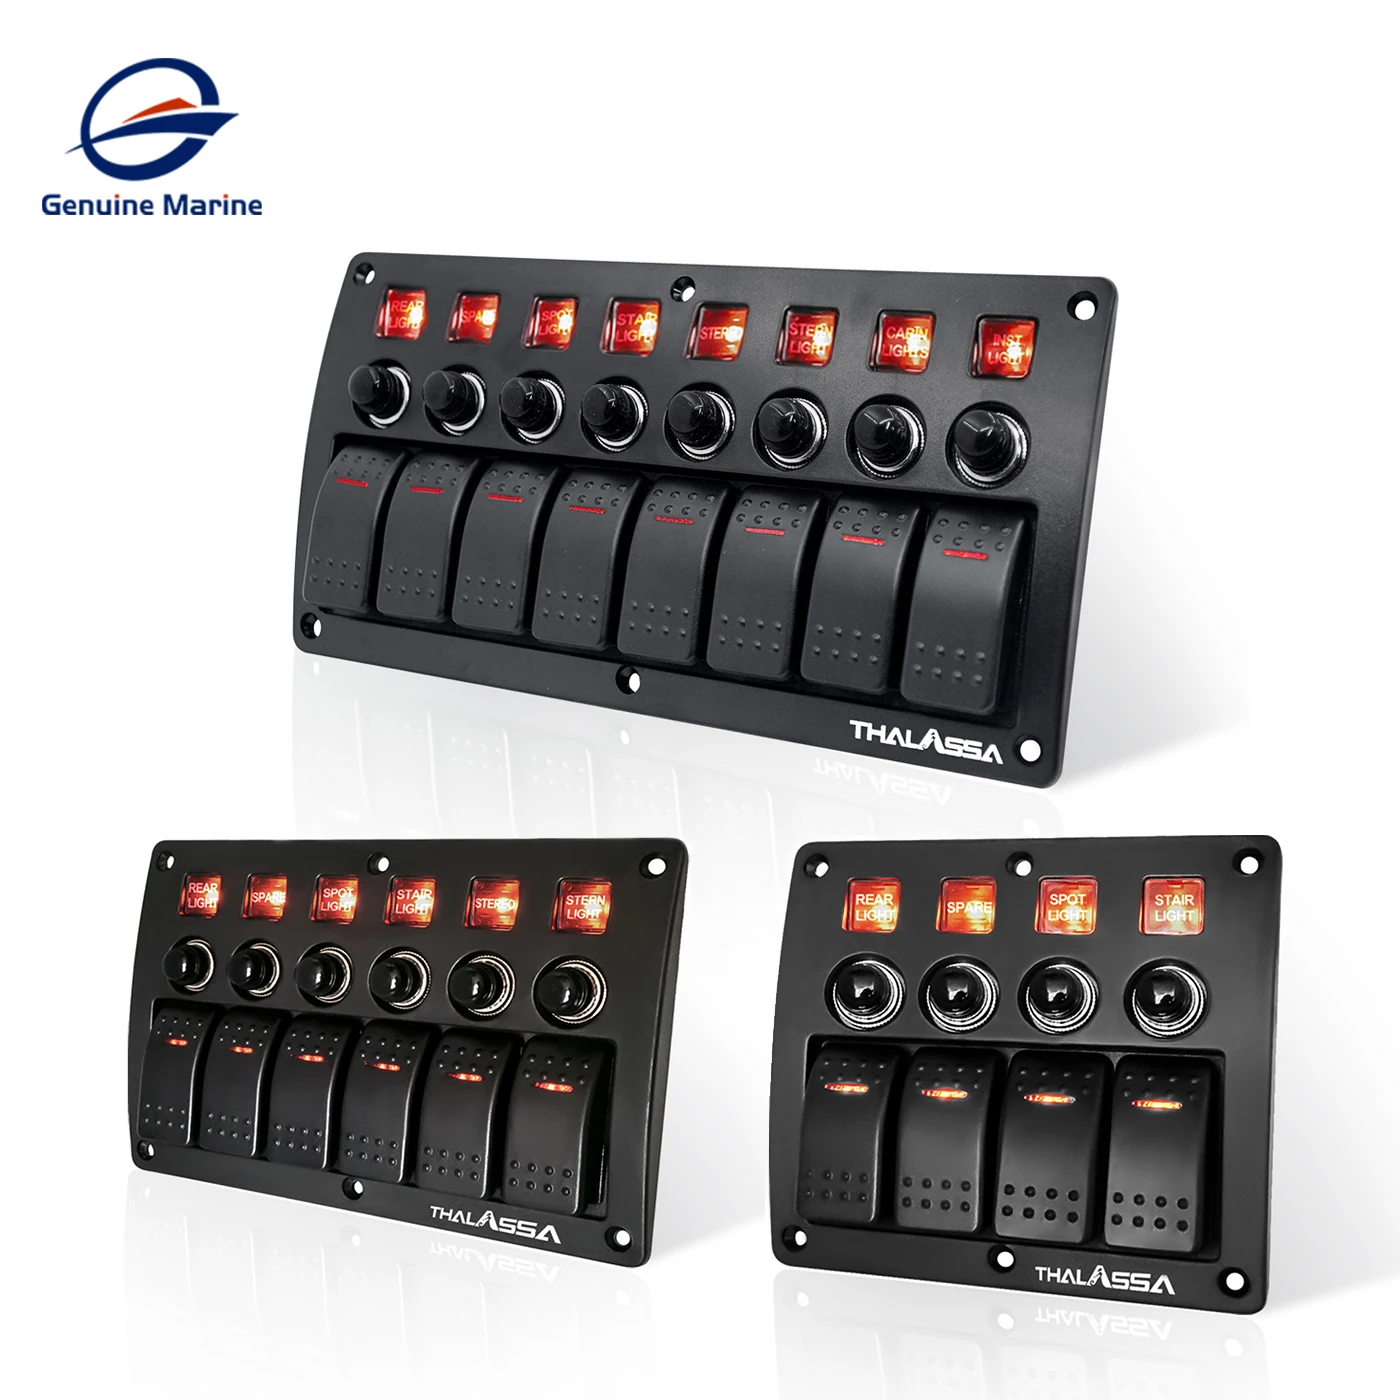 

4 6 8 Gang Dual LED Marine Boat Rocker Switch Panel 12V Waterproof Toggle Rocker Switches for Boat RV Camper Truck Accessories